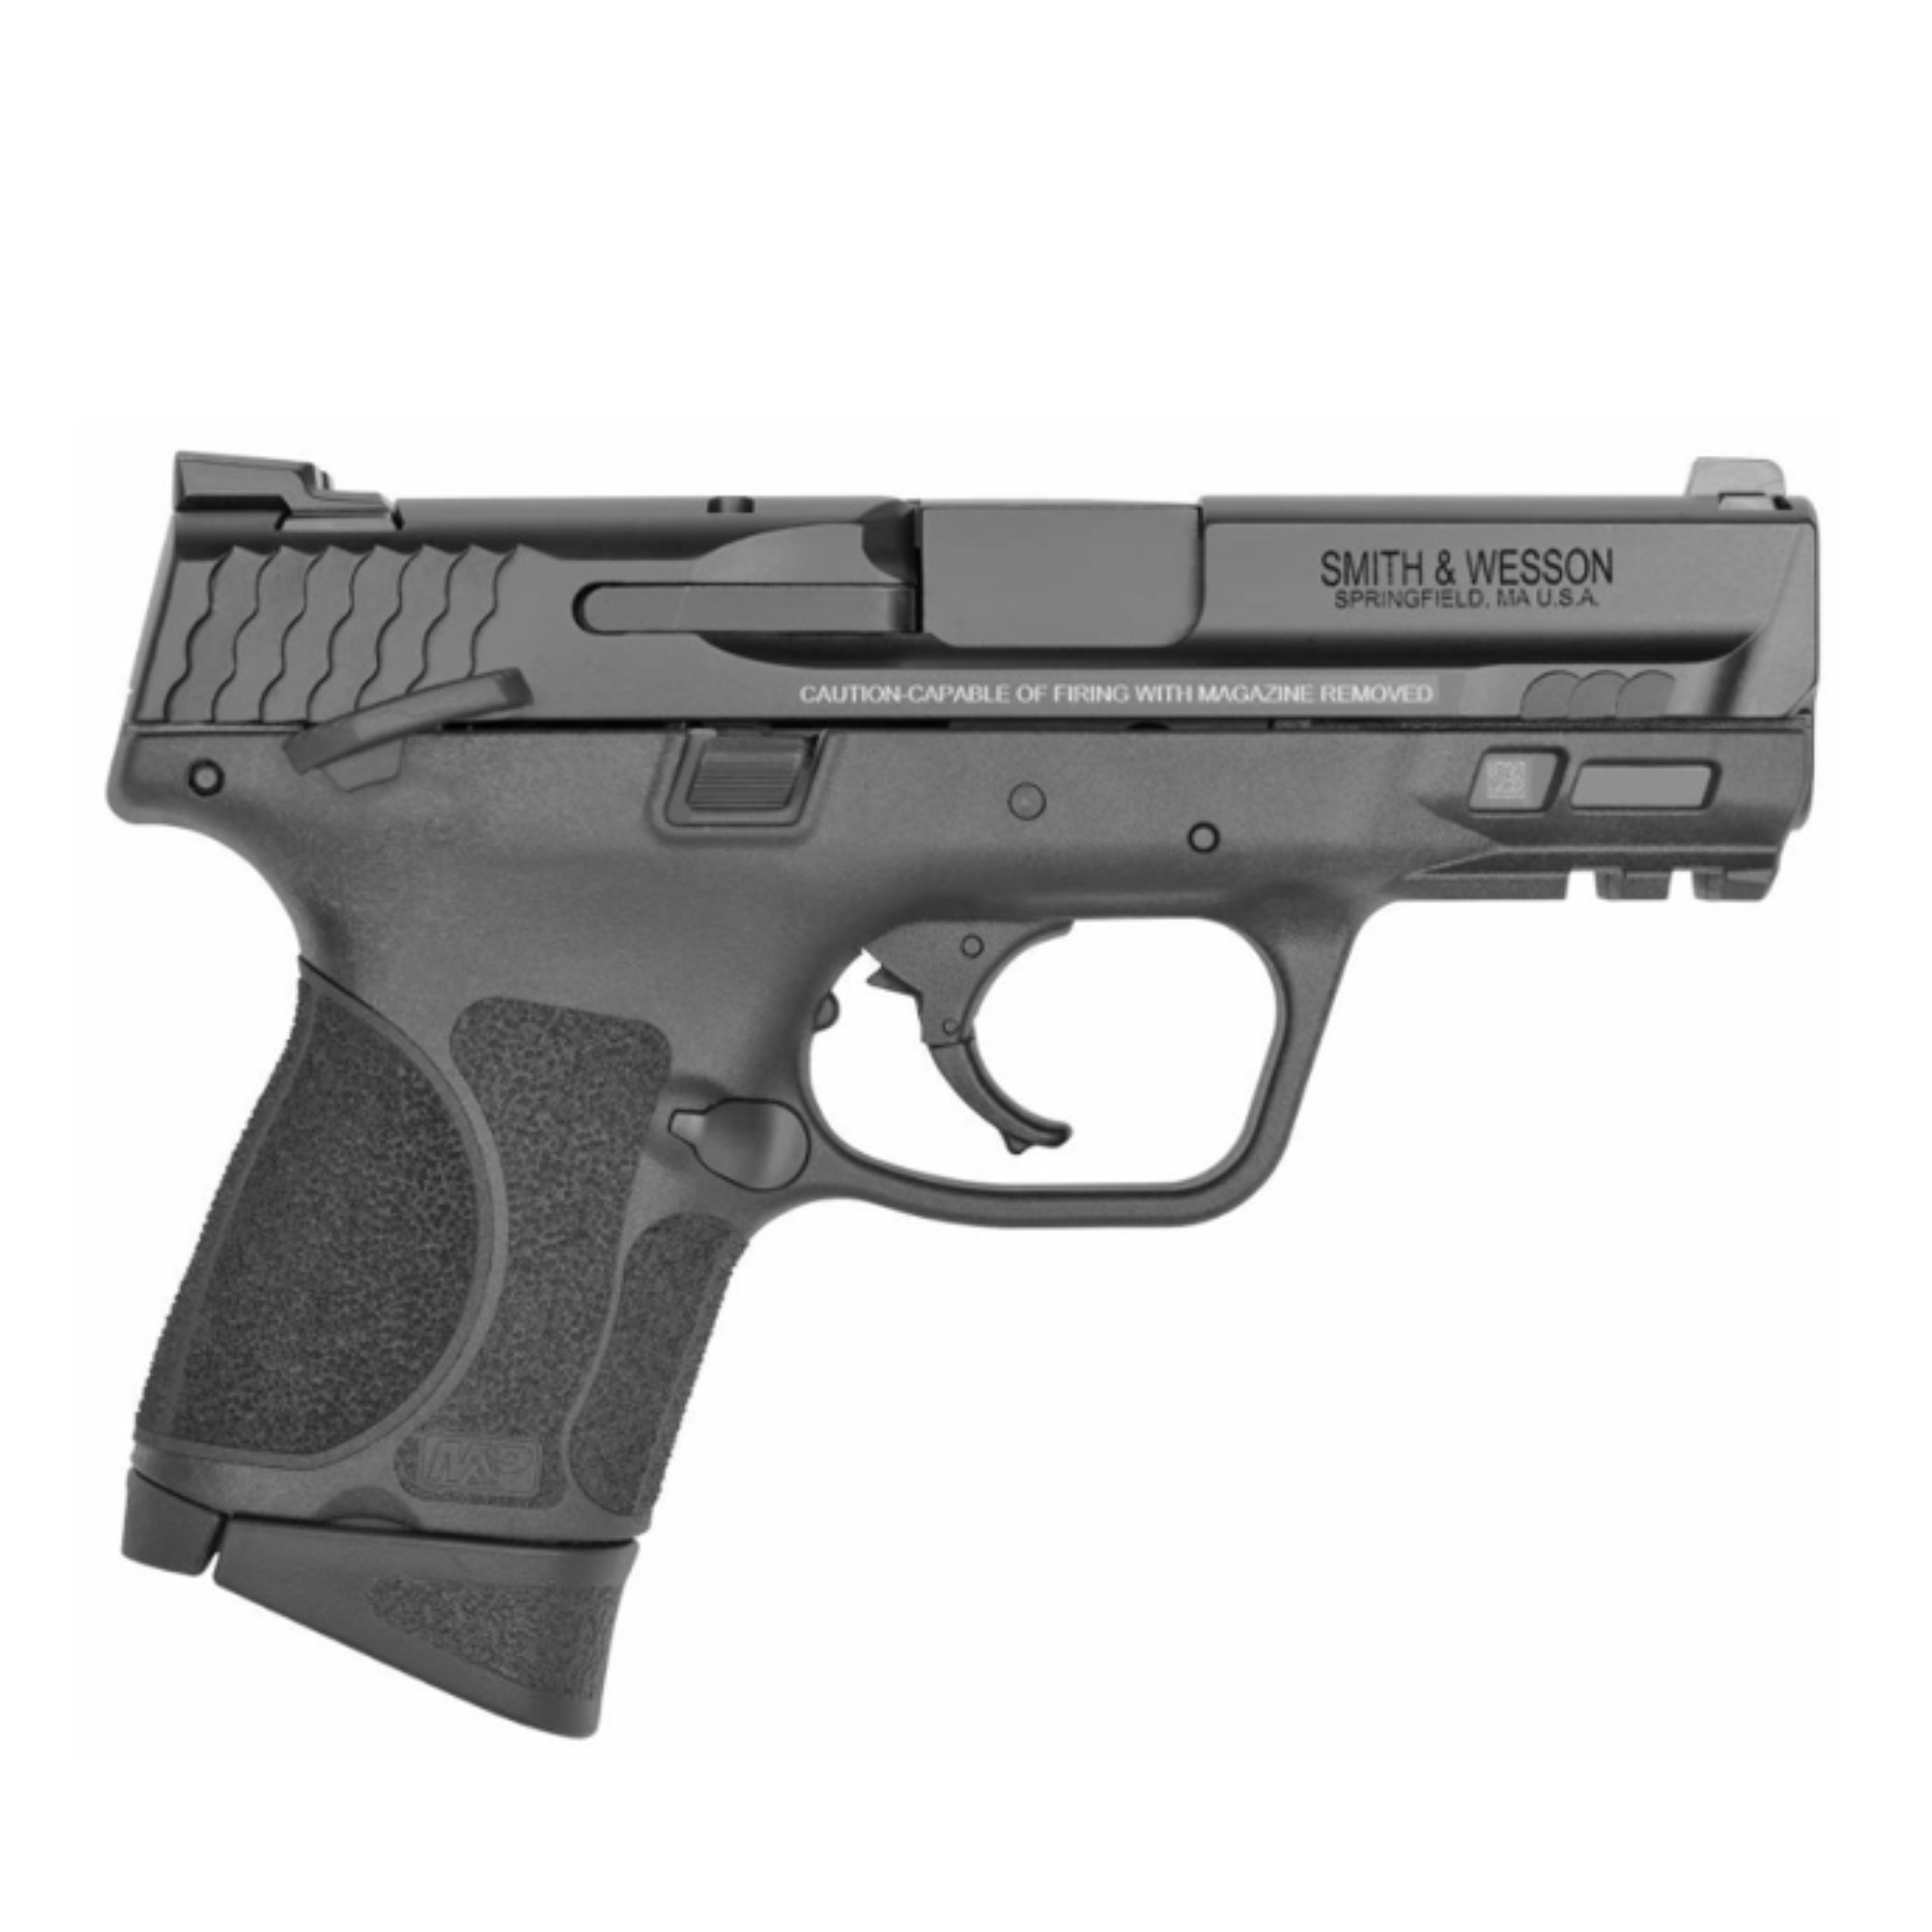 Smith & Wesson M&P M2.0 Sub-Compact 9mm Luger 3.60"BBL (13010)